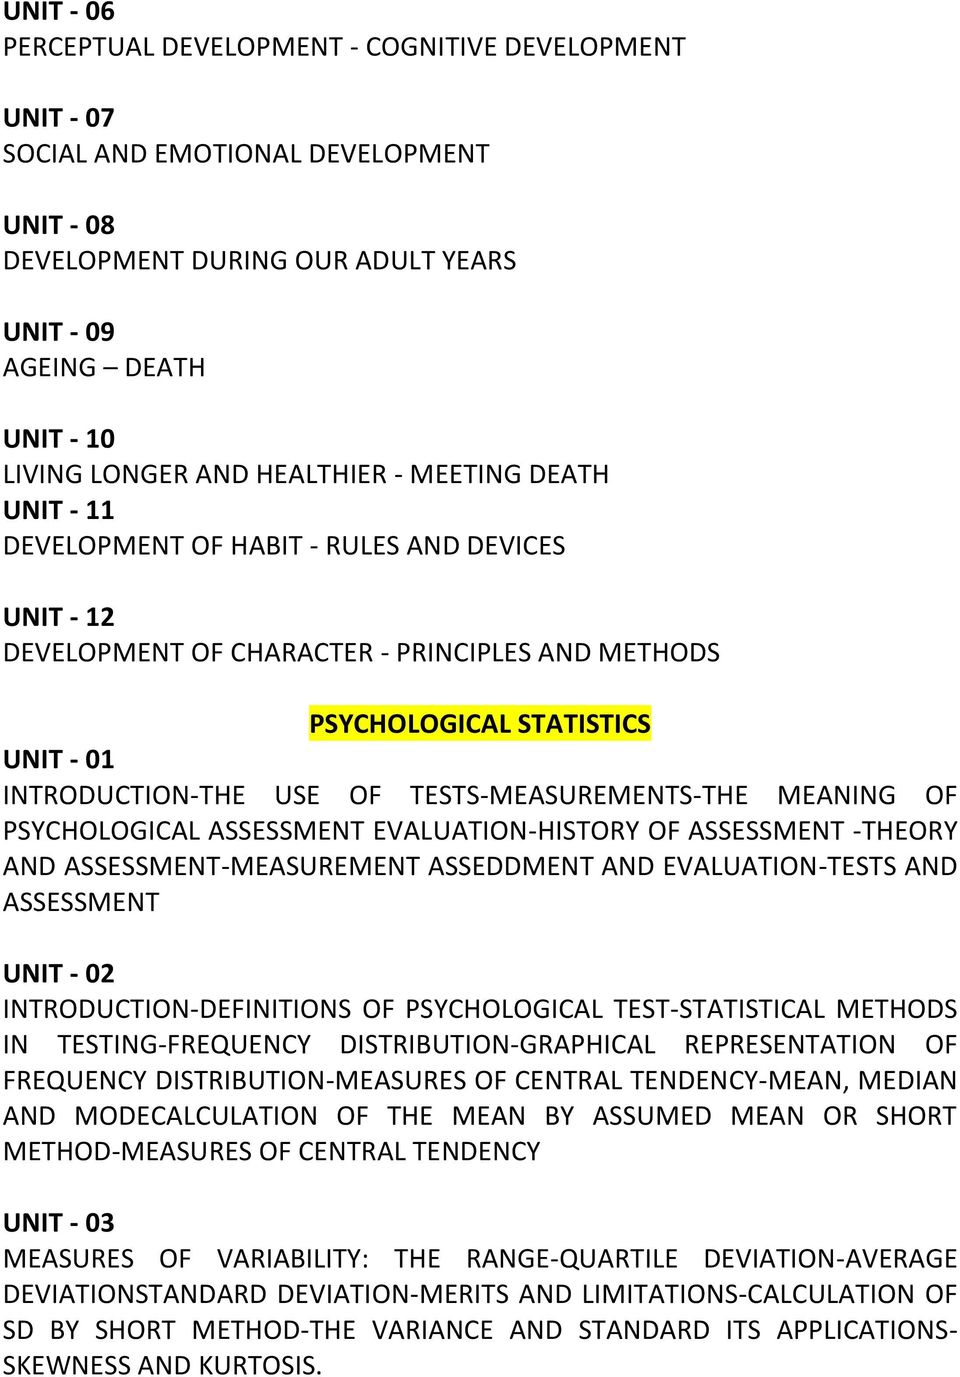 EVALUATION-HISTORY OF ASSESSMENT -THEORY AND ASSESSMENT-MEASUREMENT ASSEDDMENT AND EVALUATION-TESTS AND ASSESSMENT INTRODUCTION-DEFINITIONS OF PSYCHOLOGICAL TEST-STATISTICAL METHODS IN